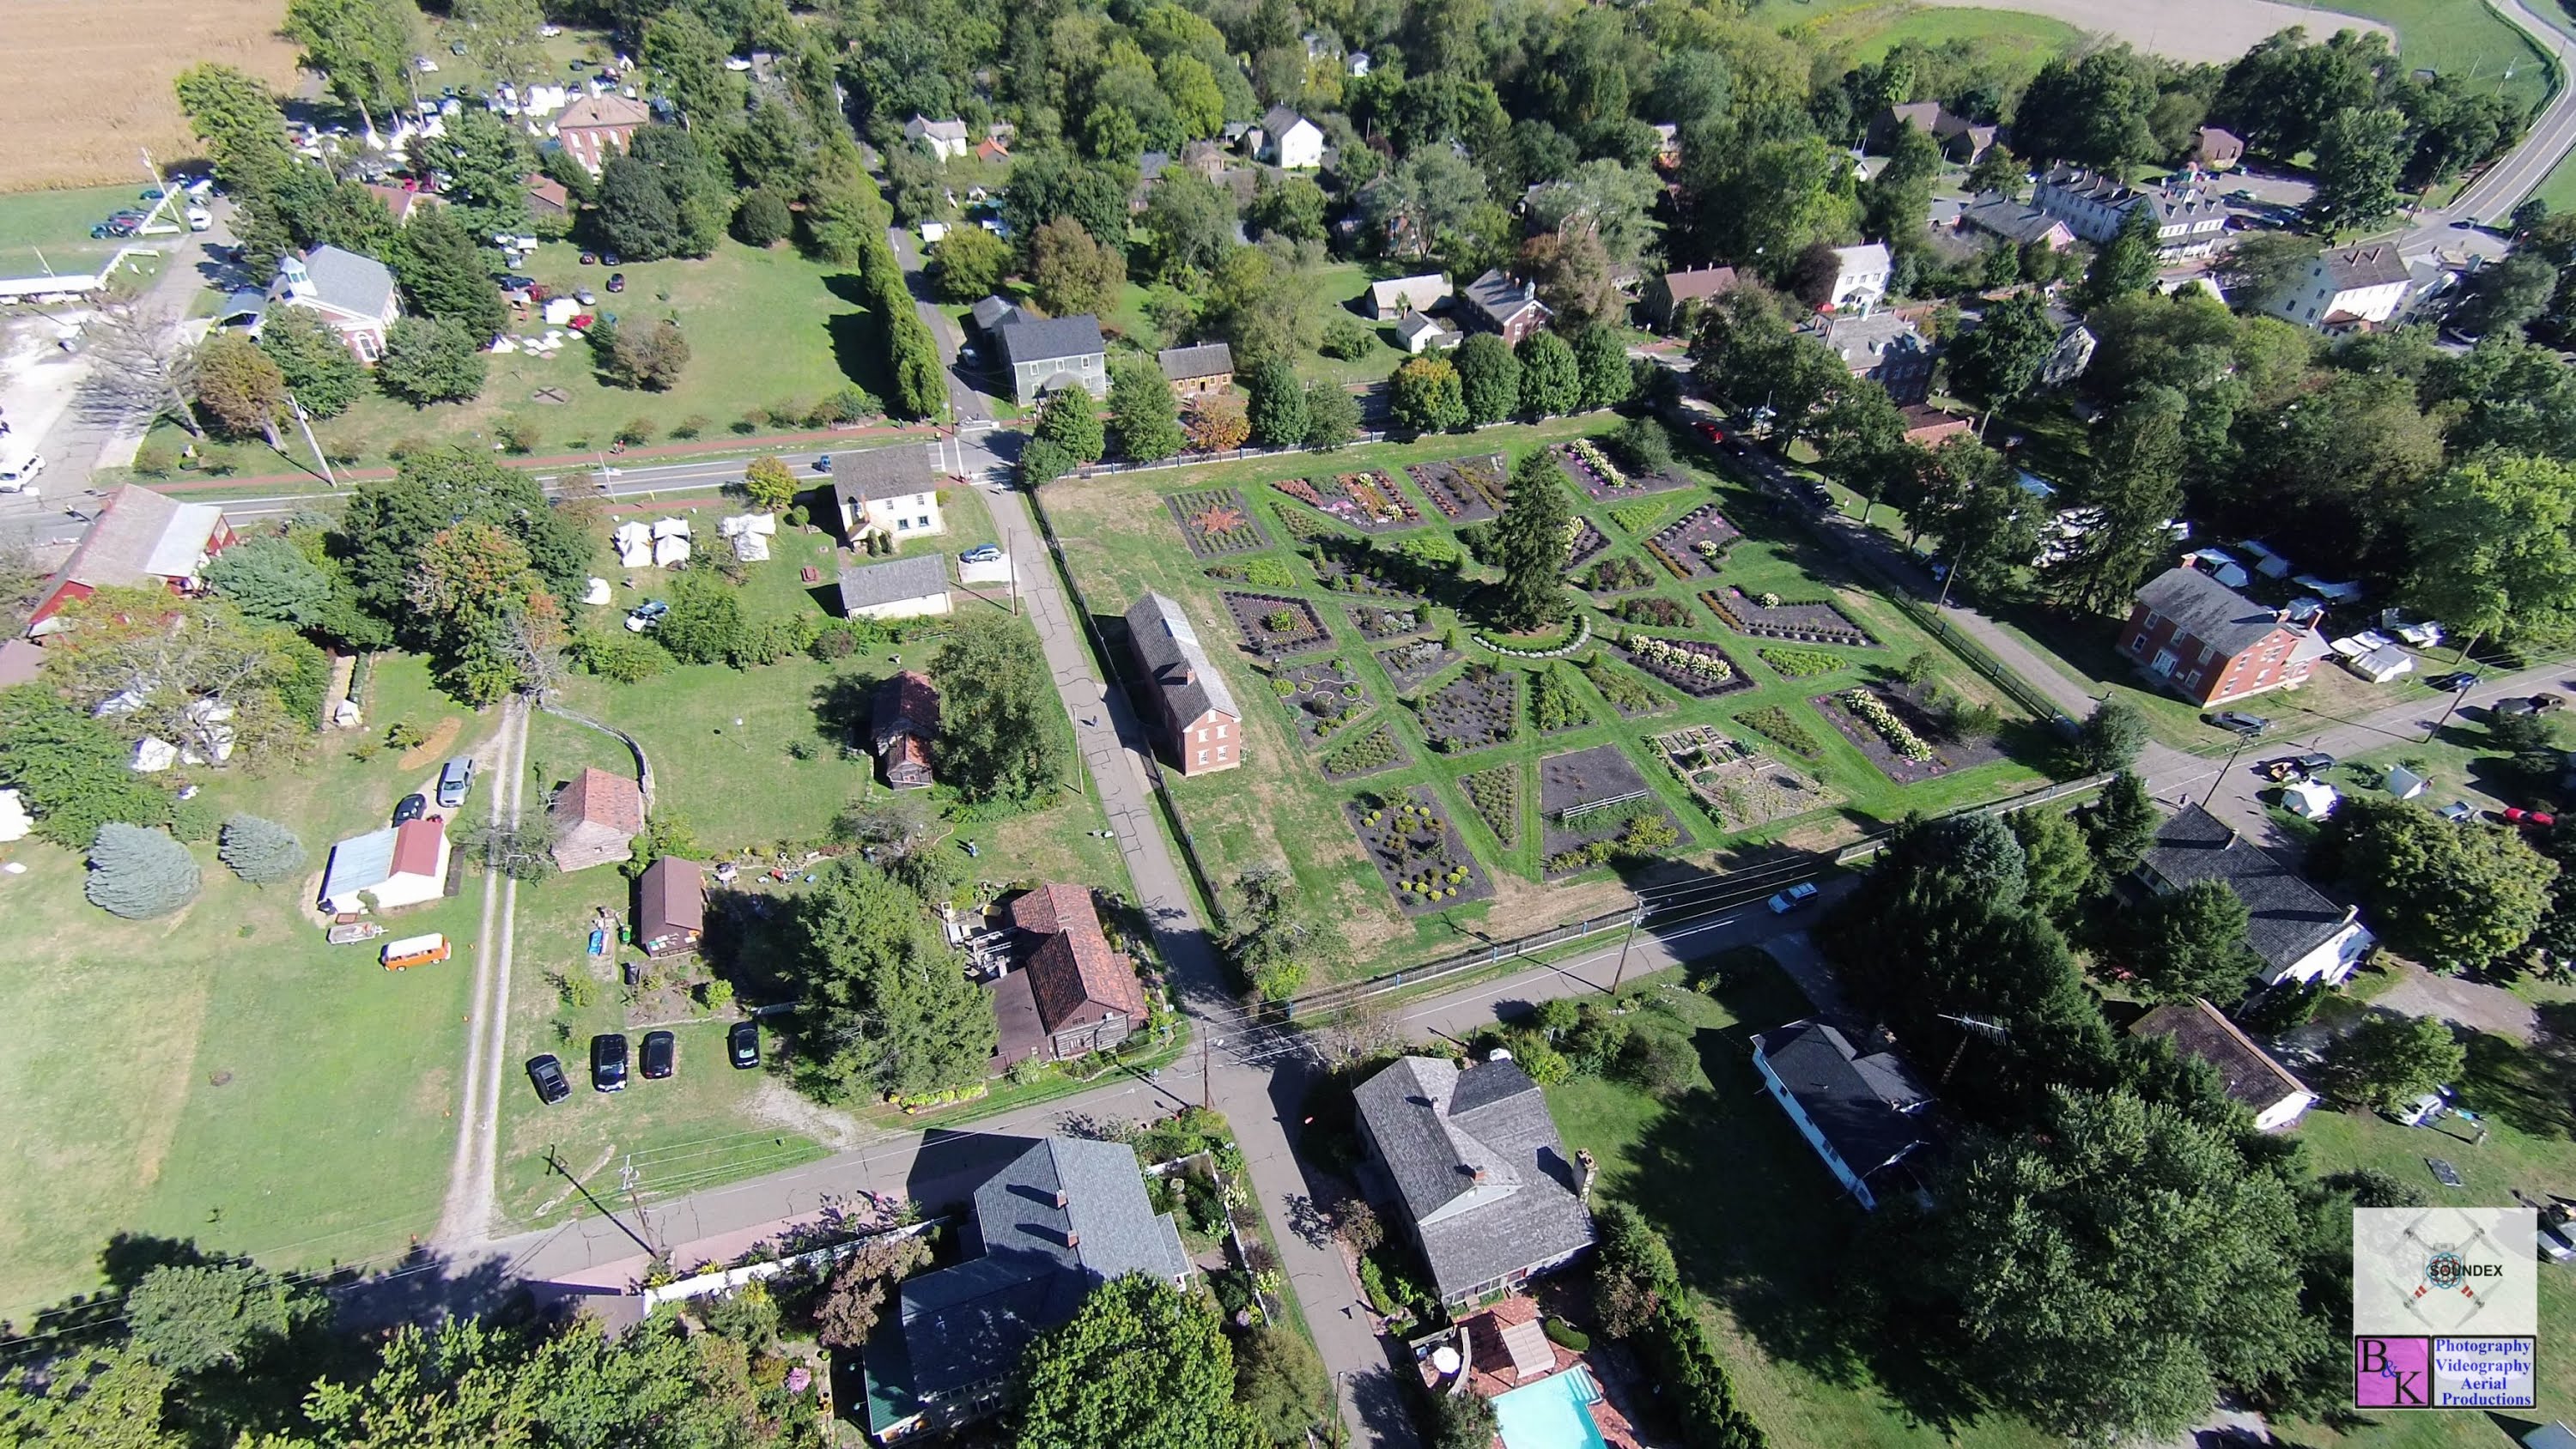 Zoar Historic Village - Aerial Perspectives - YouTube